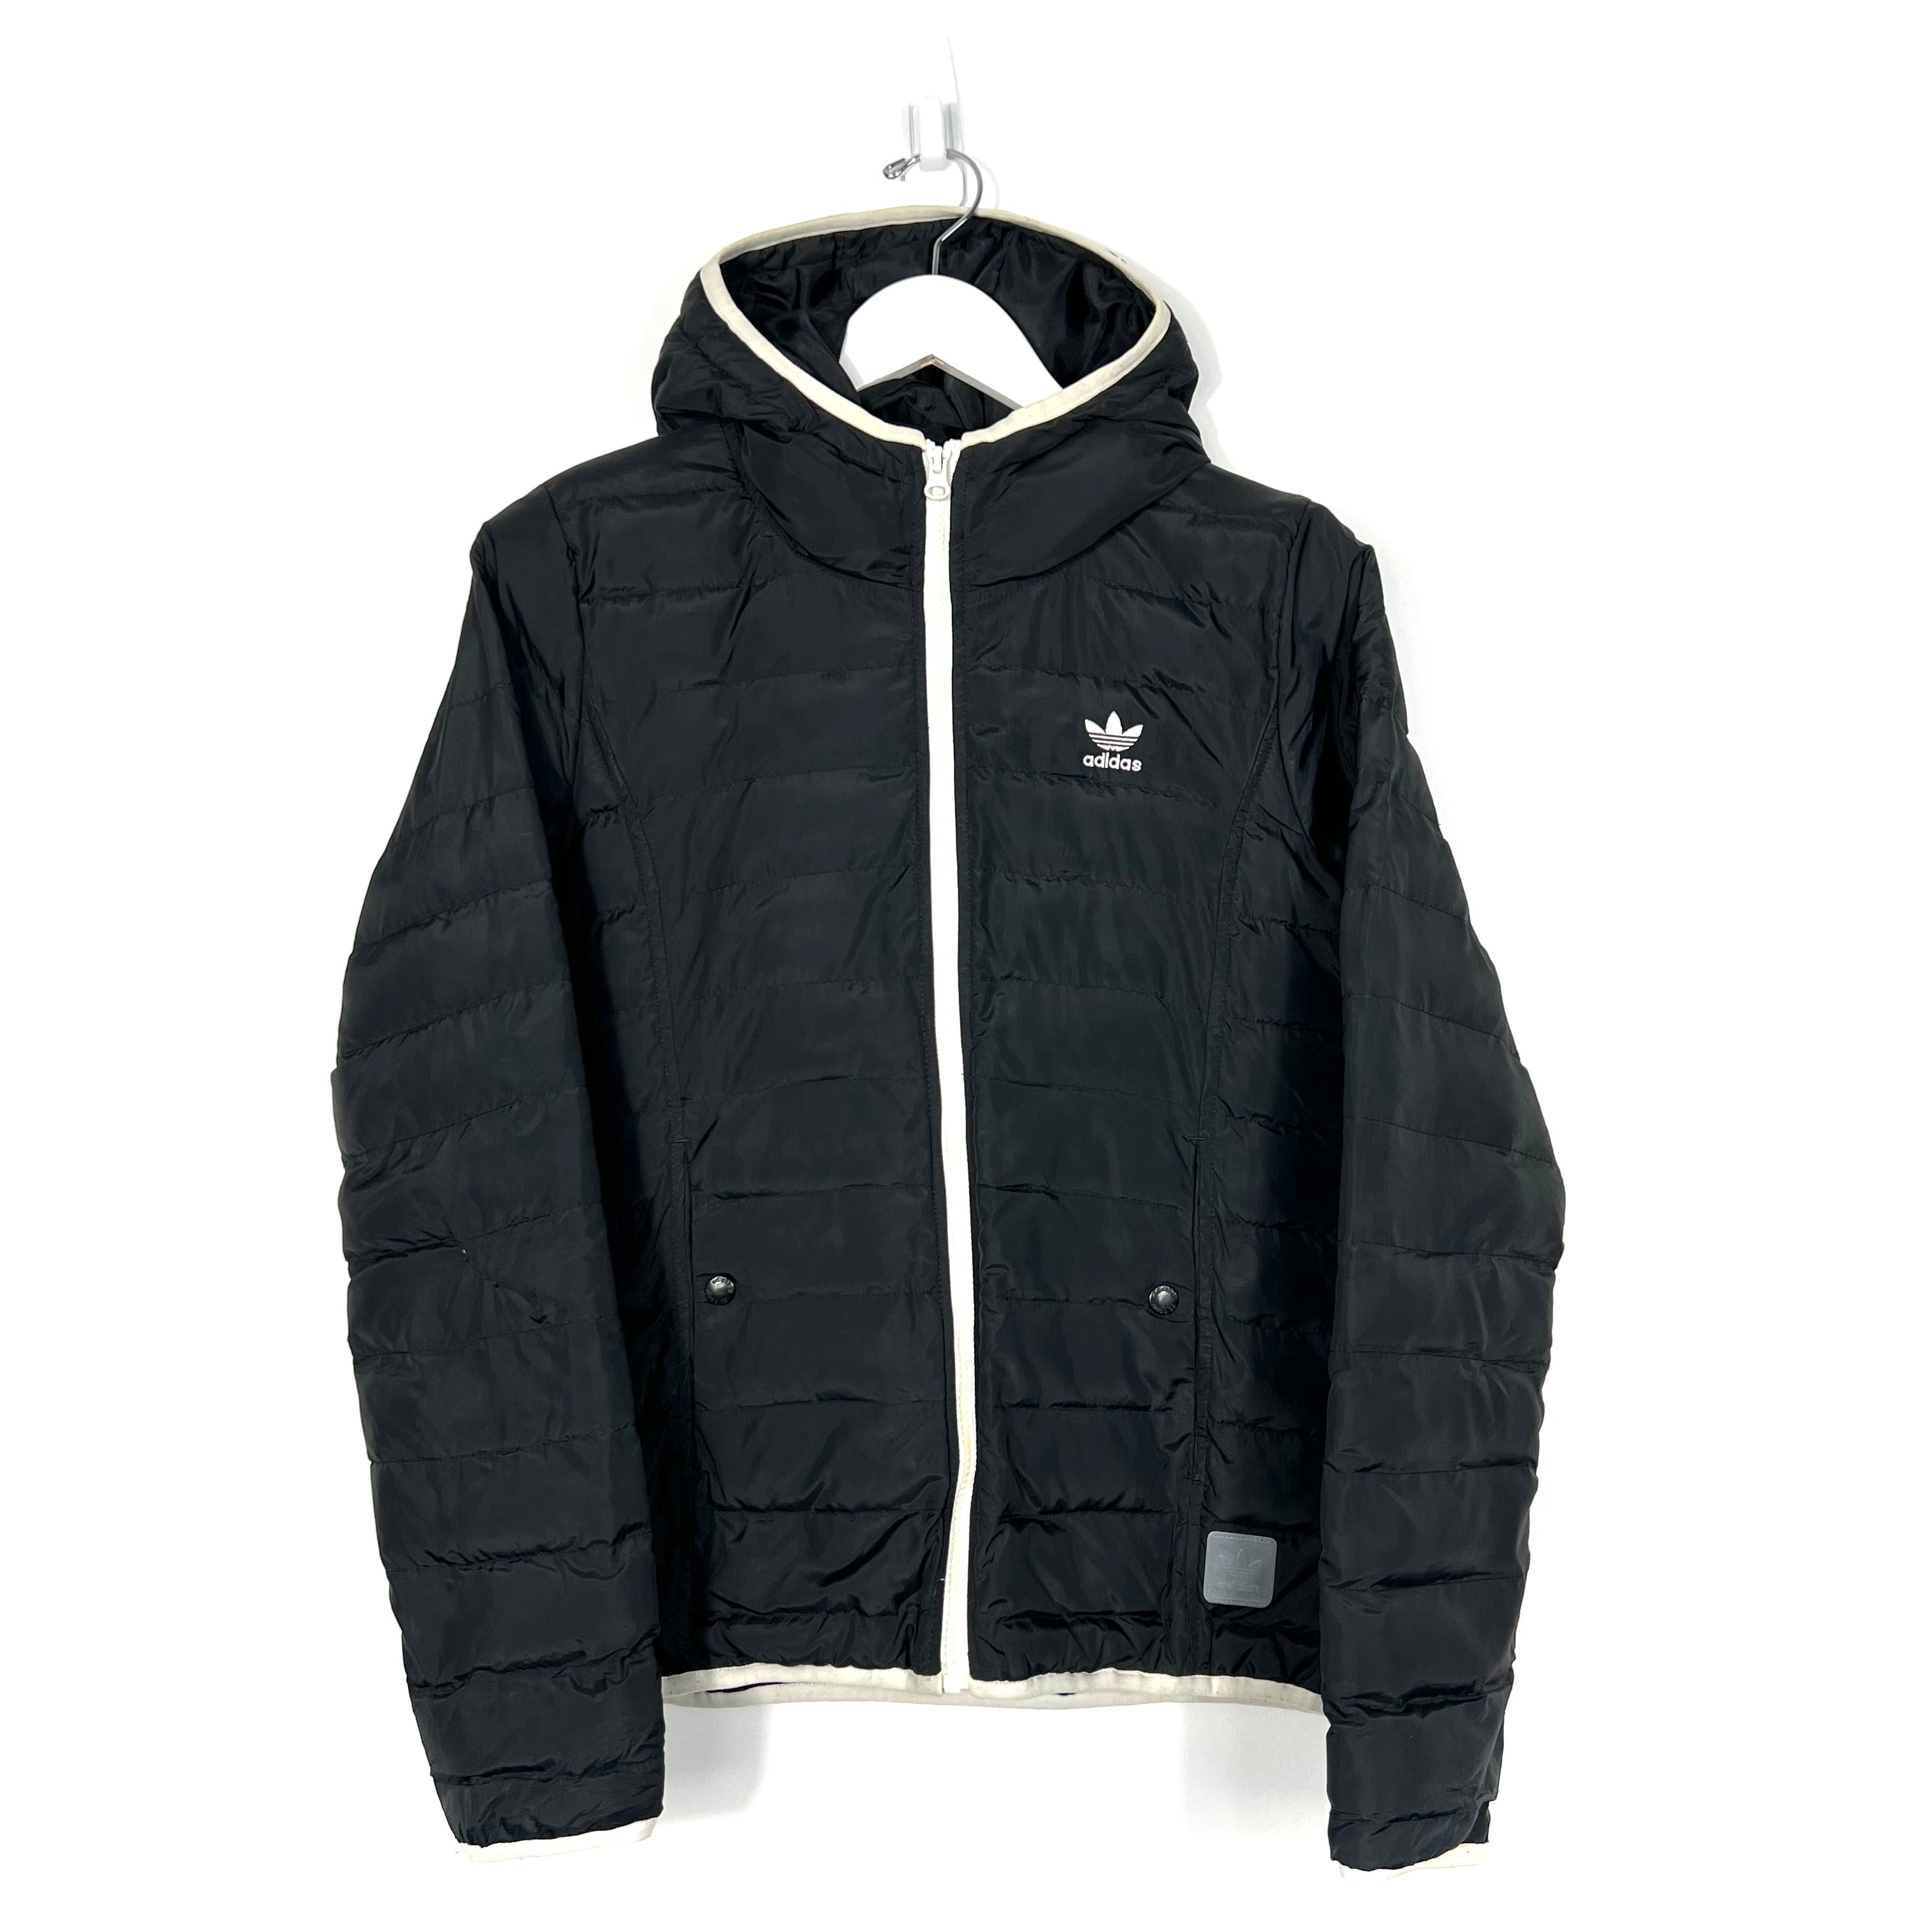 Adidas Insulated Jacket - Women's Small